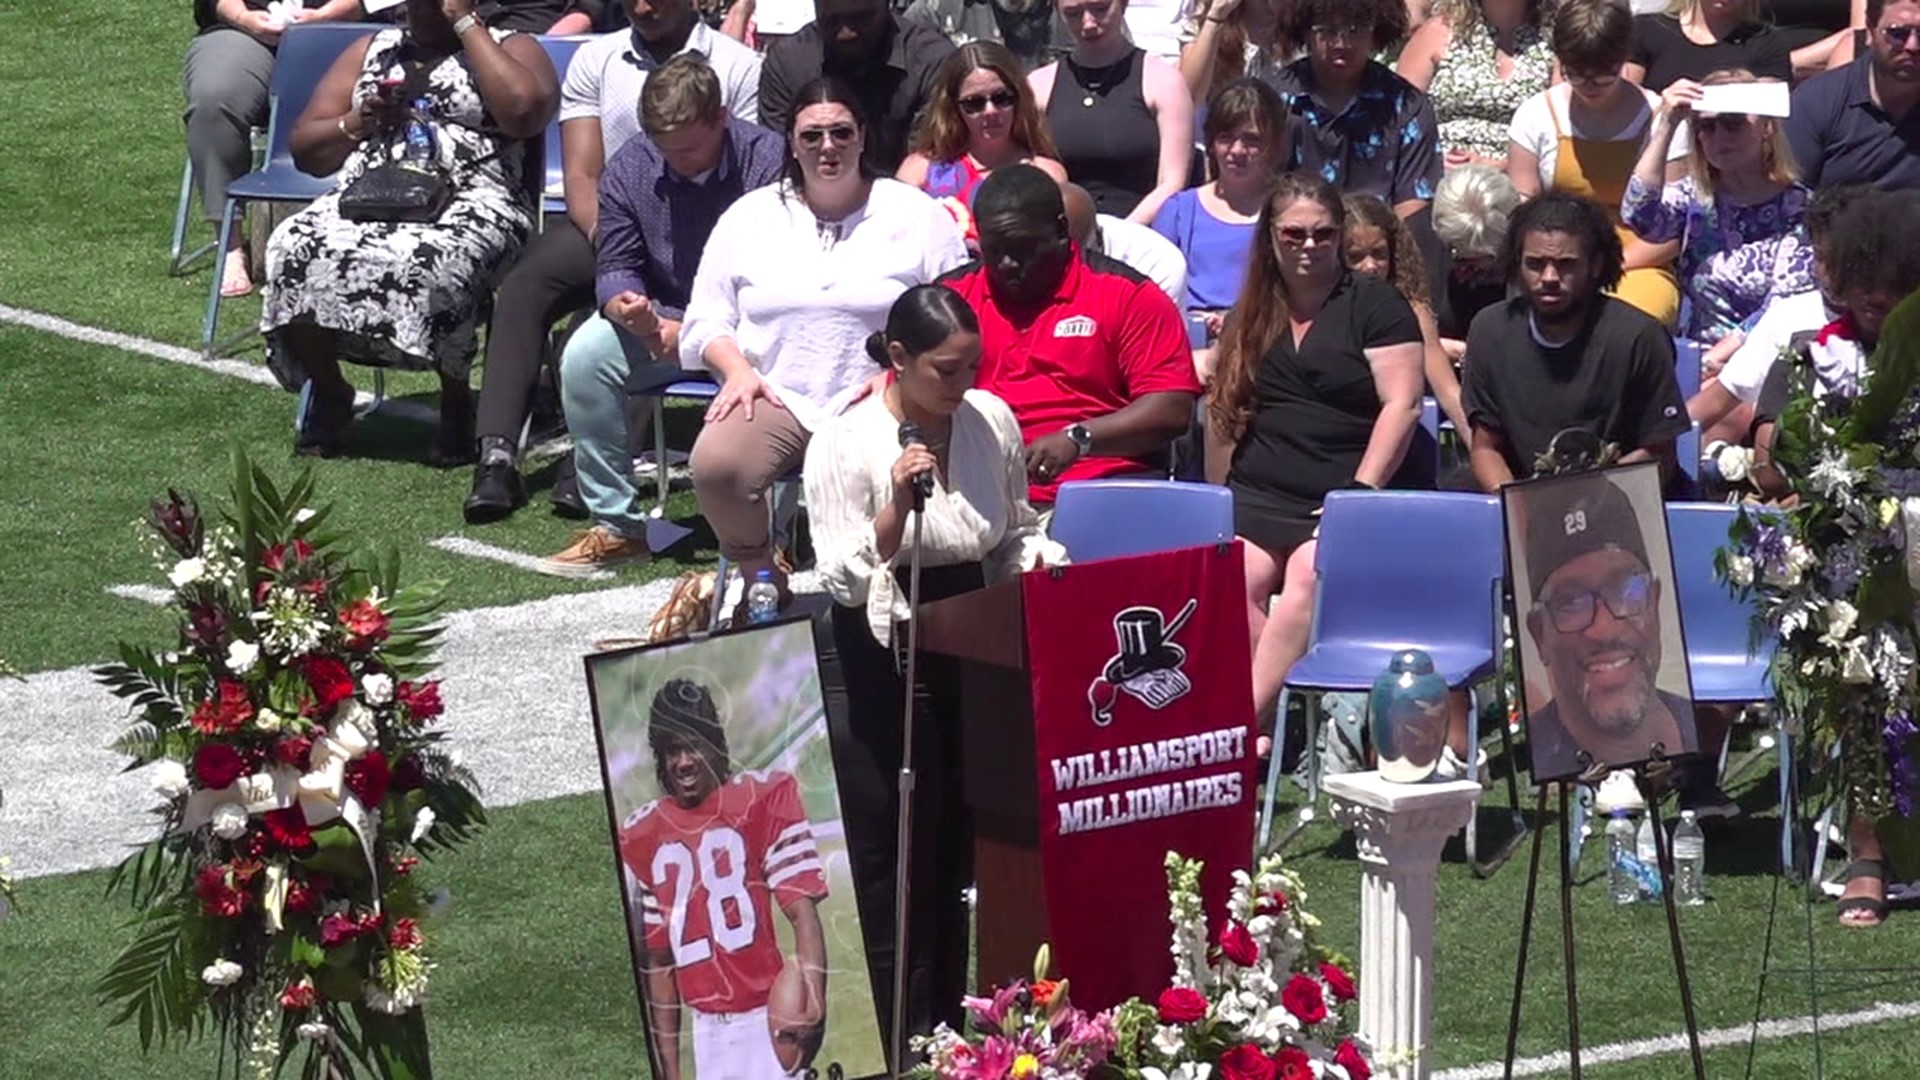 Gary Brown Jr., a star football player and NFL coach, passed away earlier this year. Saturday, the community gathered to honor his legacy in his hometown.